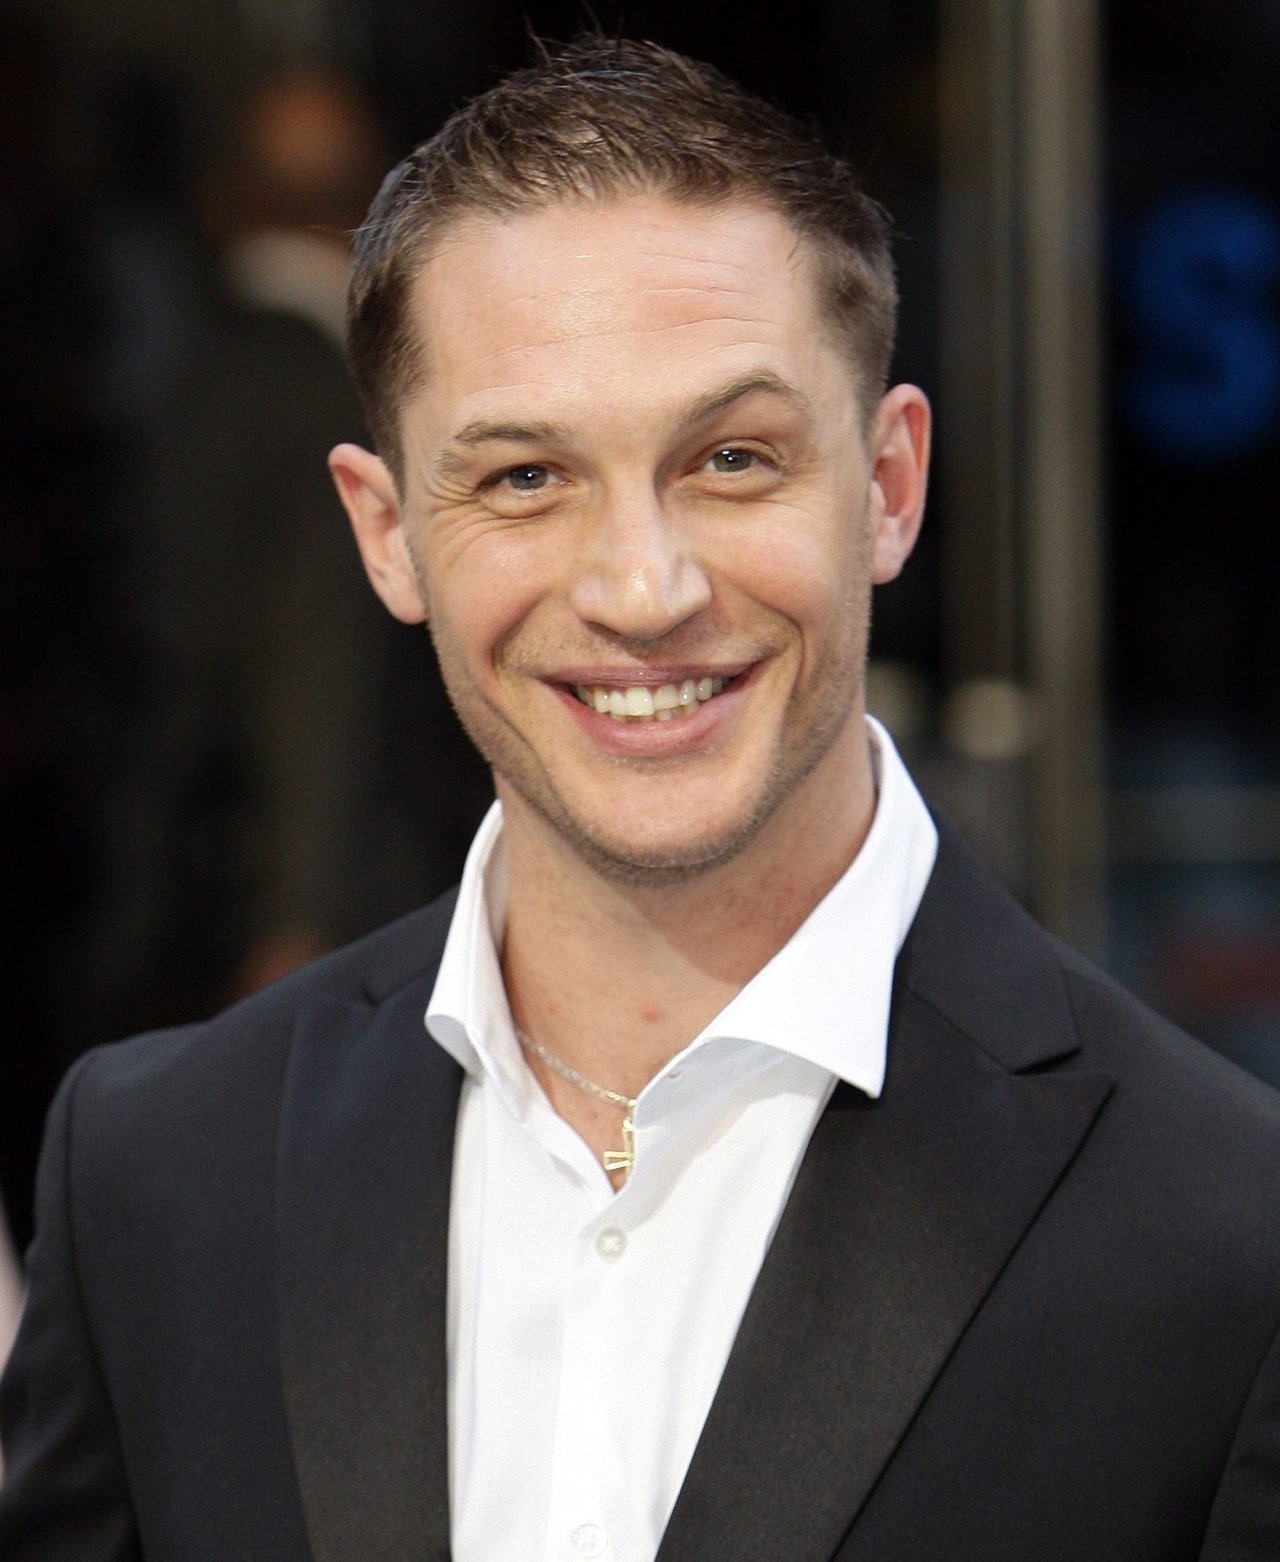 Exploring Tom Hardy, I so adore this smile - he should smile with teeth...